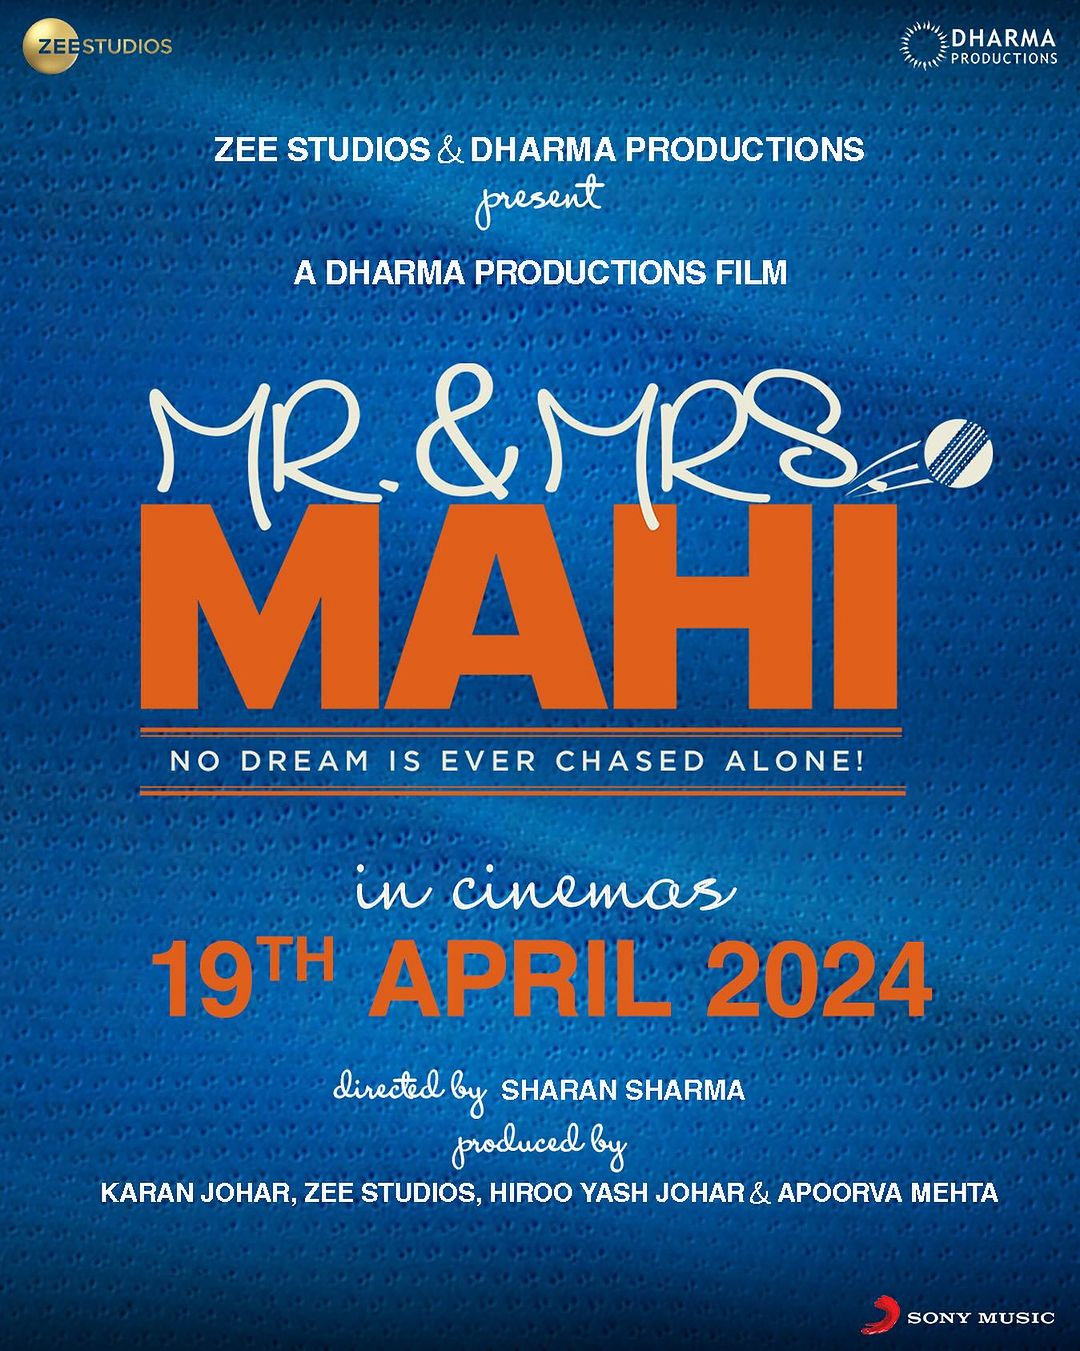 Mr. and Mrs. Mahi gets a new release date